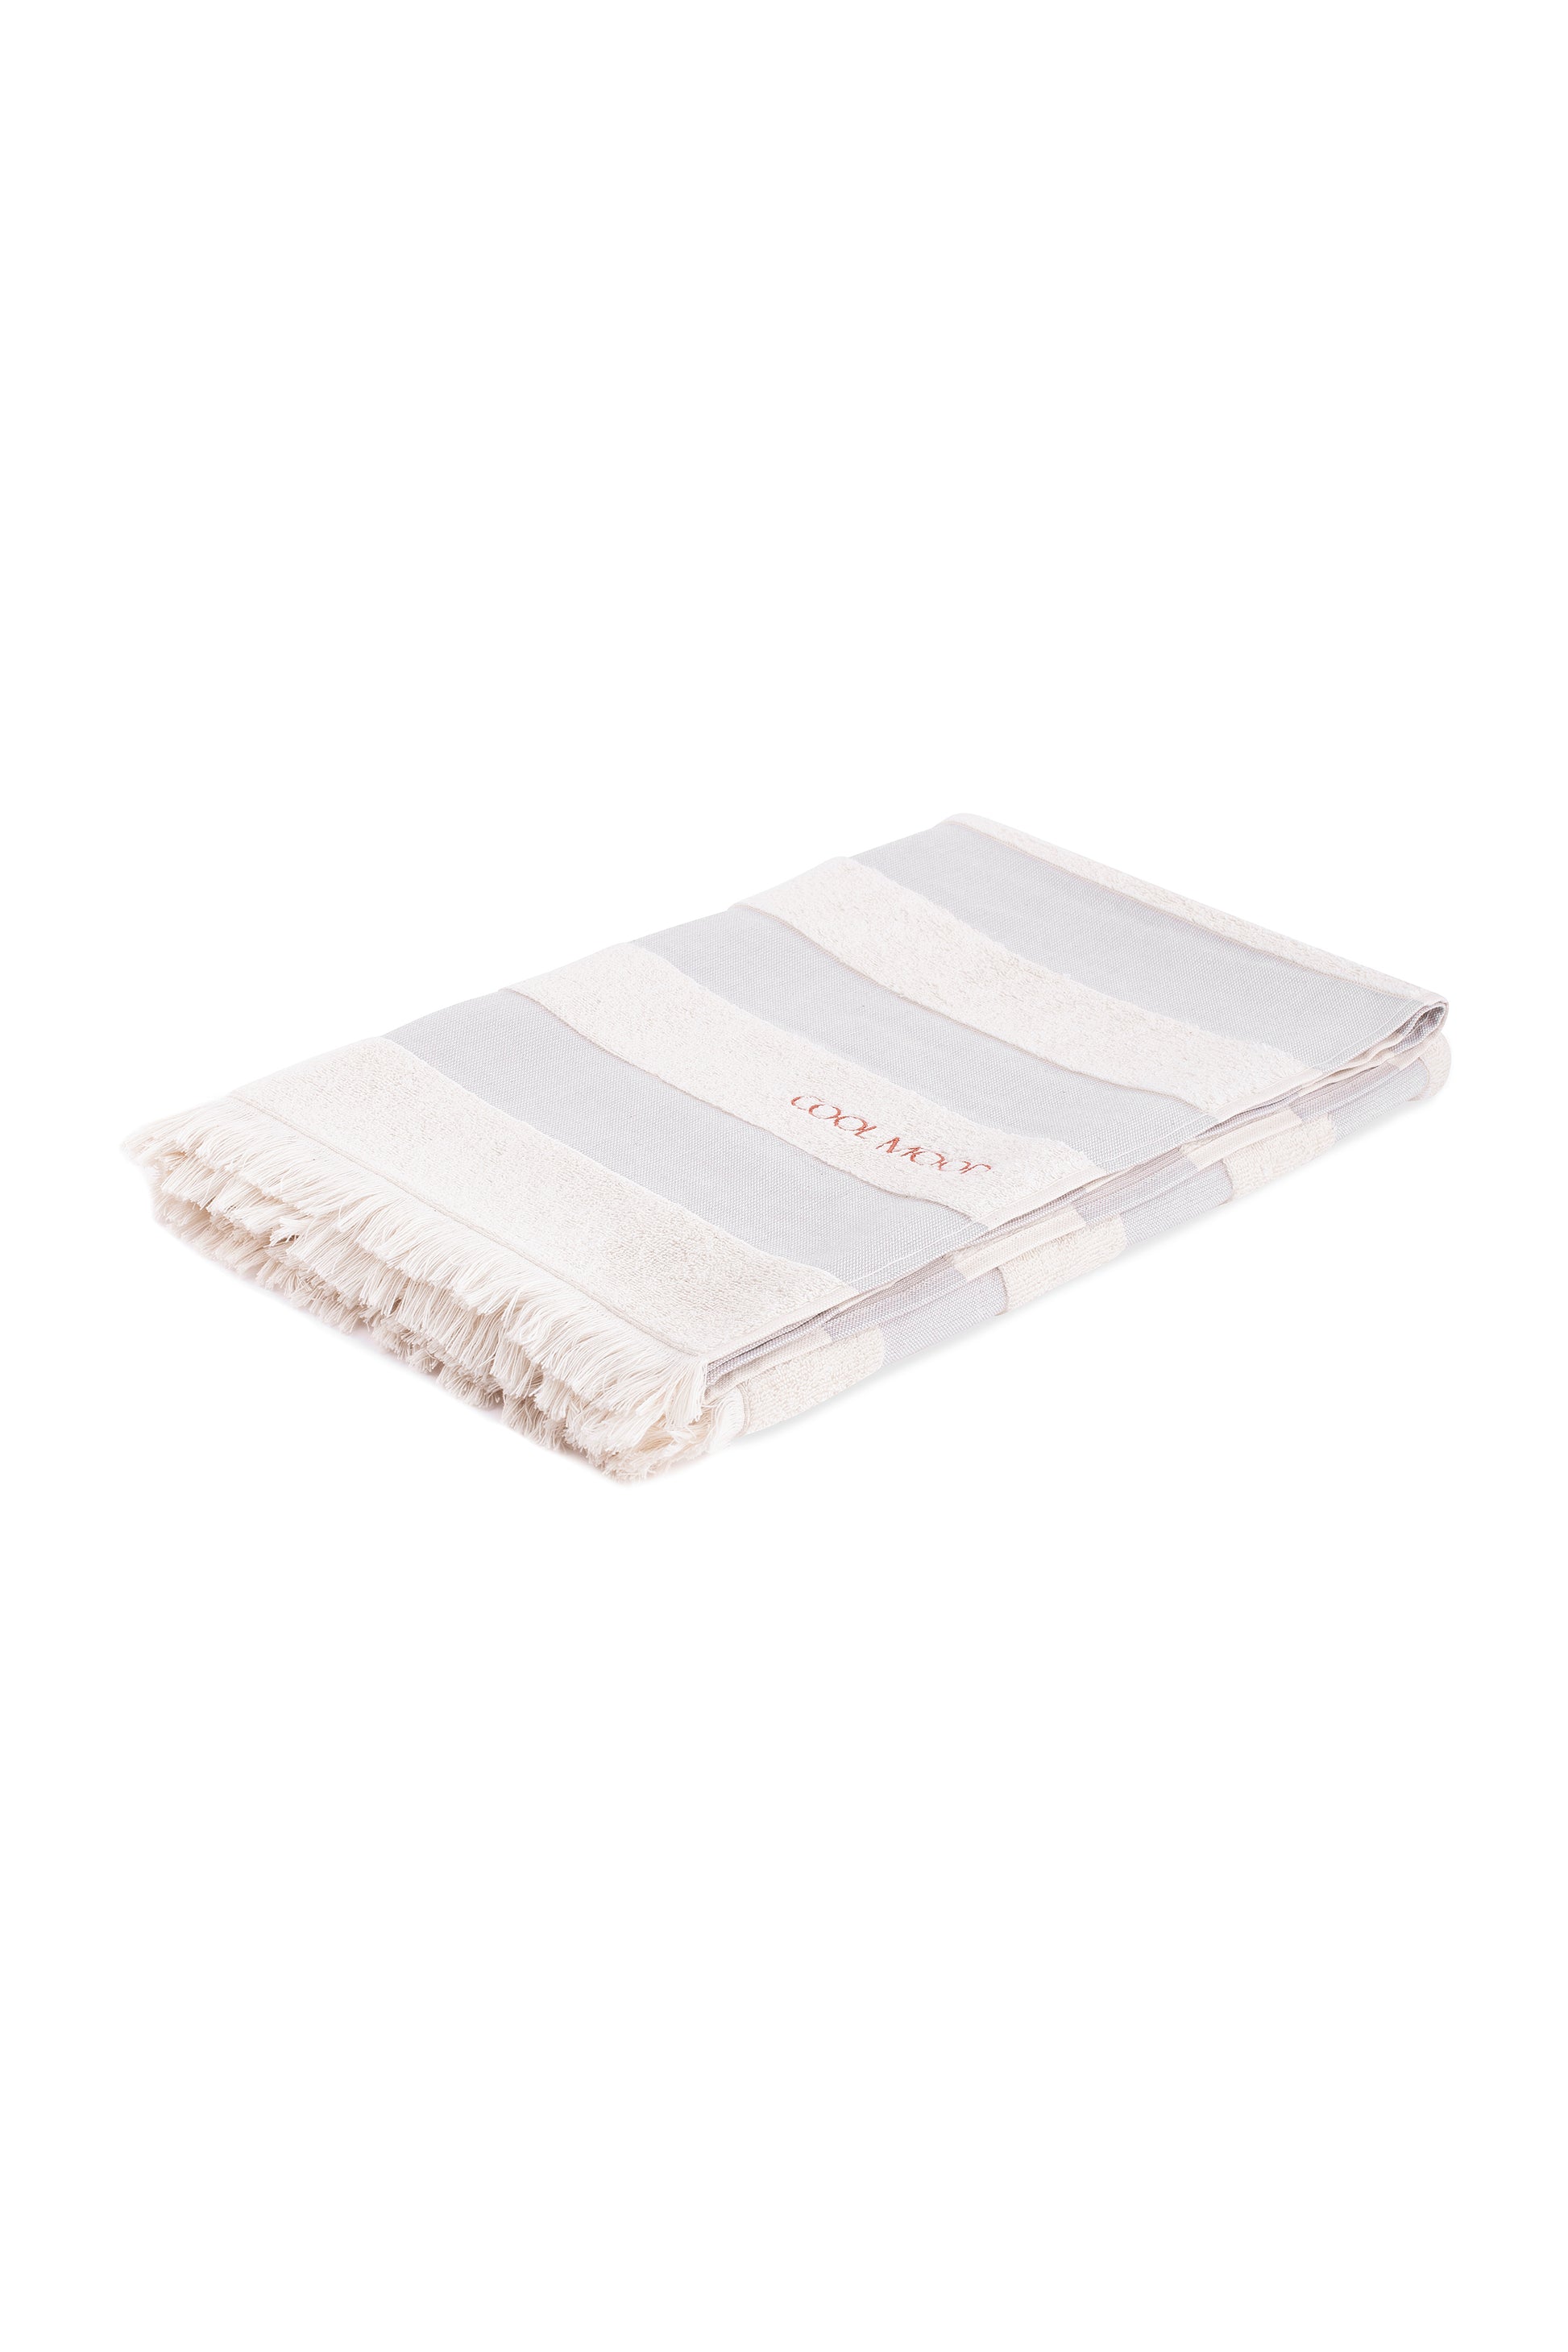 Beach towel in grey shade, with soft terry stripes, eyelash fringing detail and embroidery in rust